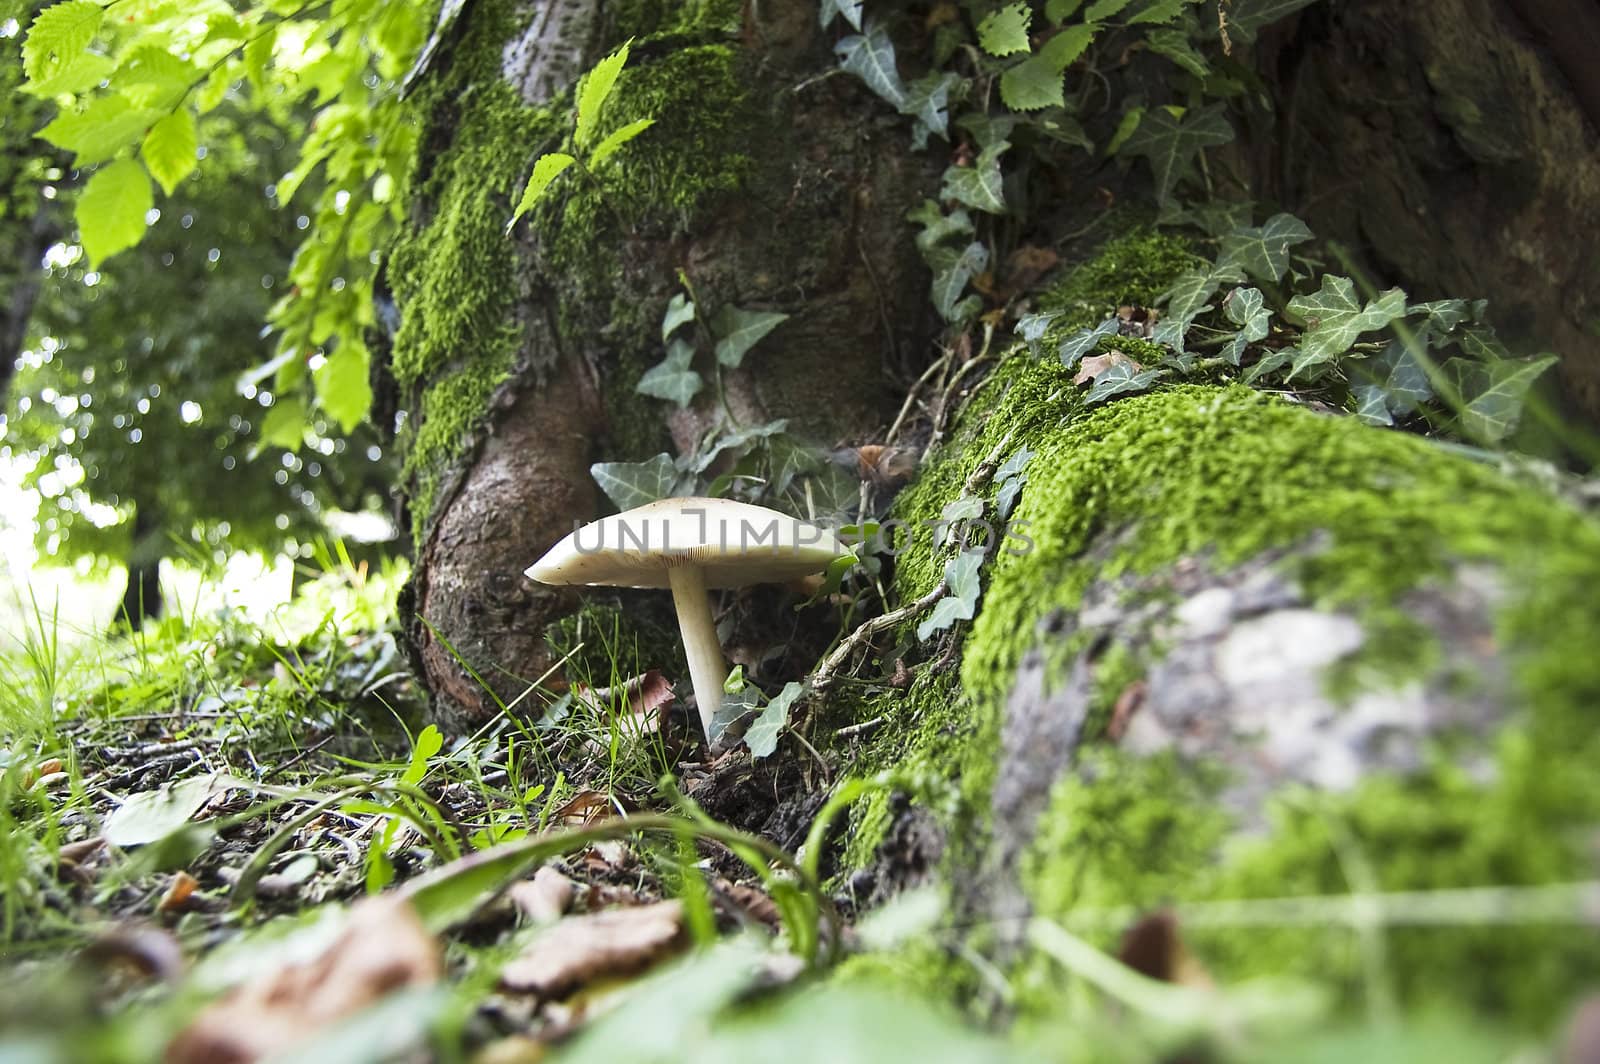 A white mushroom in a forest under an old tree